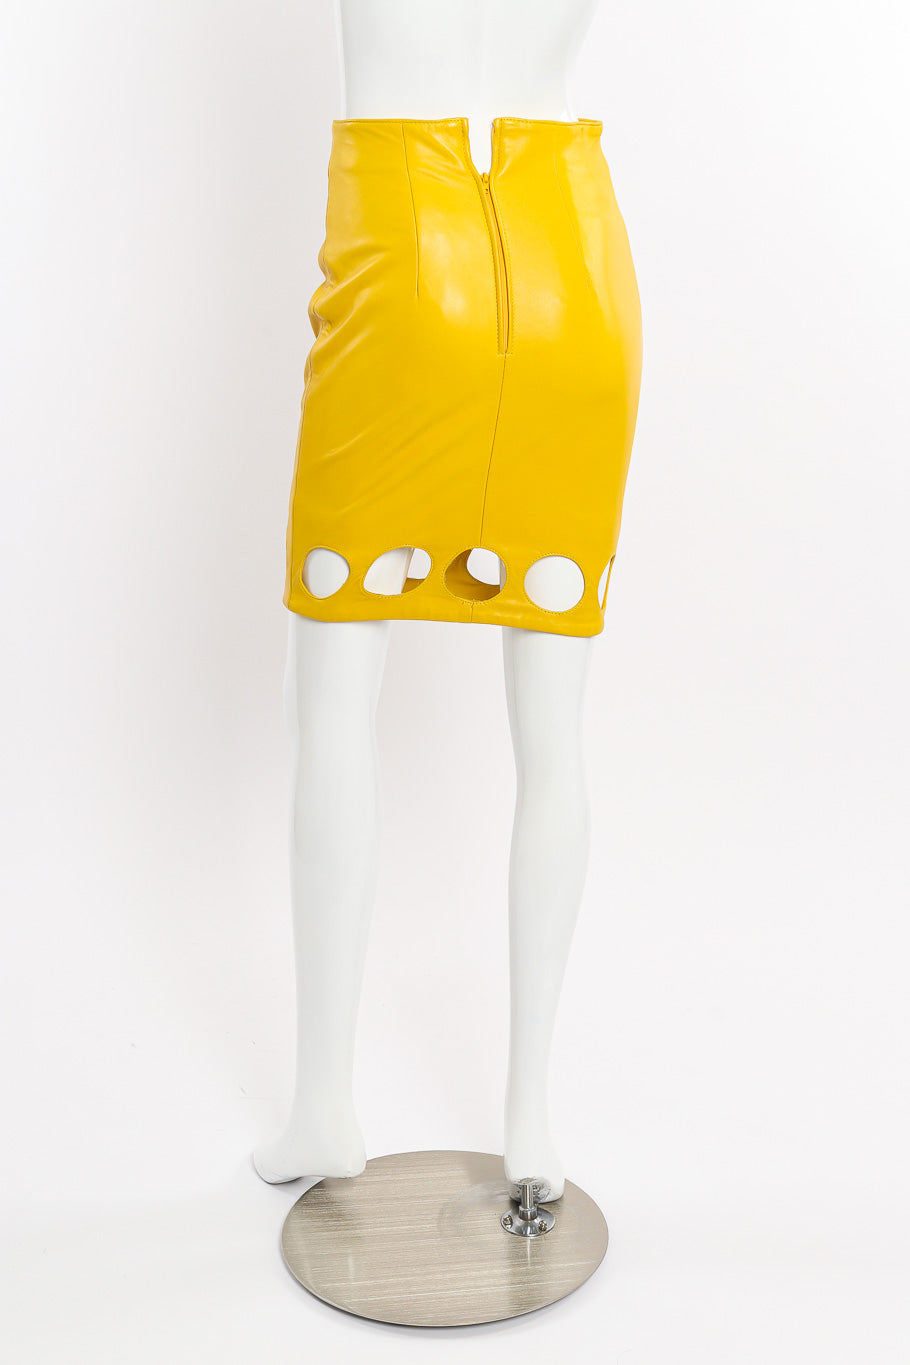 Vintage North Beach Cutout Leather Jacket and Skirt Set back view of skirt on mannequin @Recessla